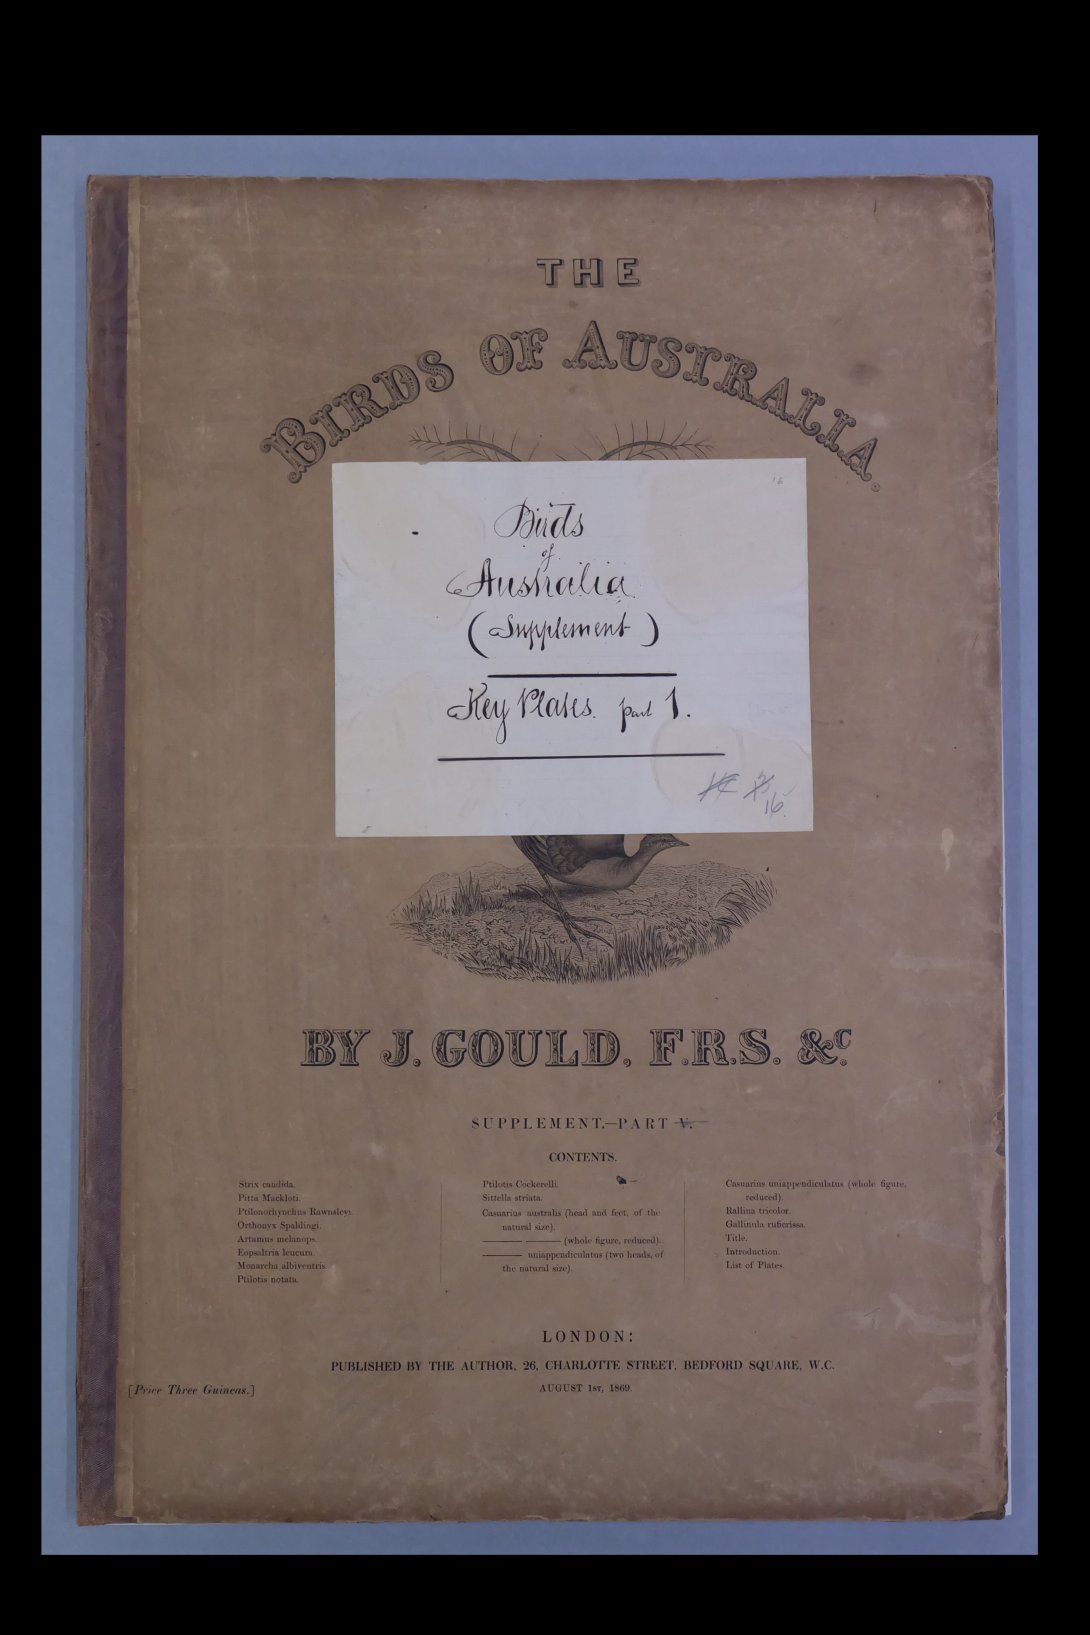 The cover of The Birds of Australia by J. Gould with a white label on the front which reads: Birds of Australia (supplement) Key Plates Part 1